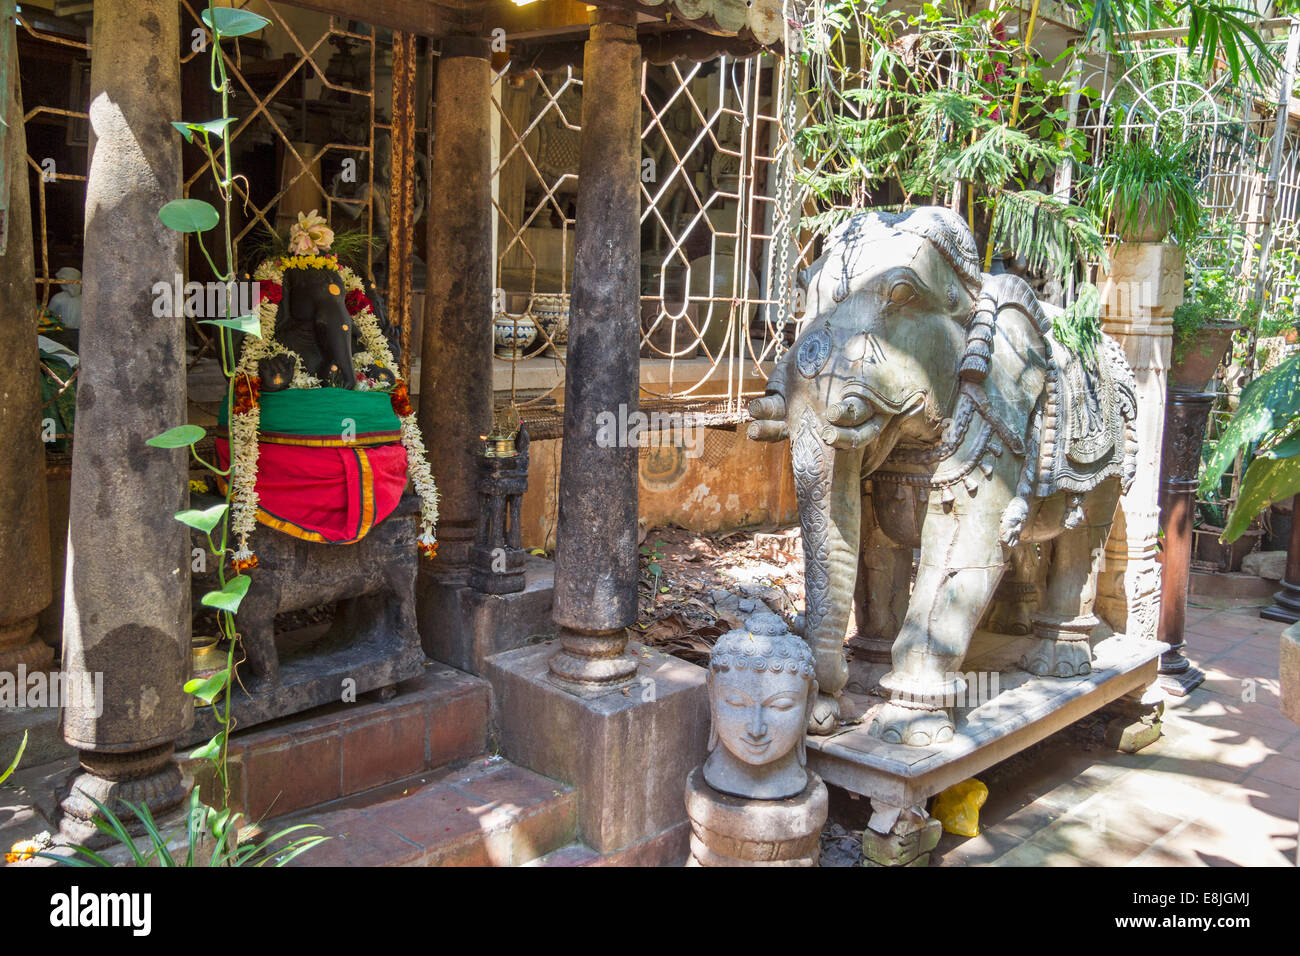 PONDICHERRY INDIA A YARD WITH ANTIQUE STATUES OF ELEPHANT AND SHRINE WITH THE ELEPHANT GOD GANESH Stock Photo